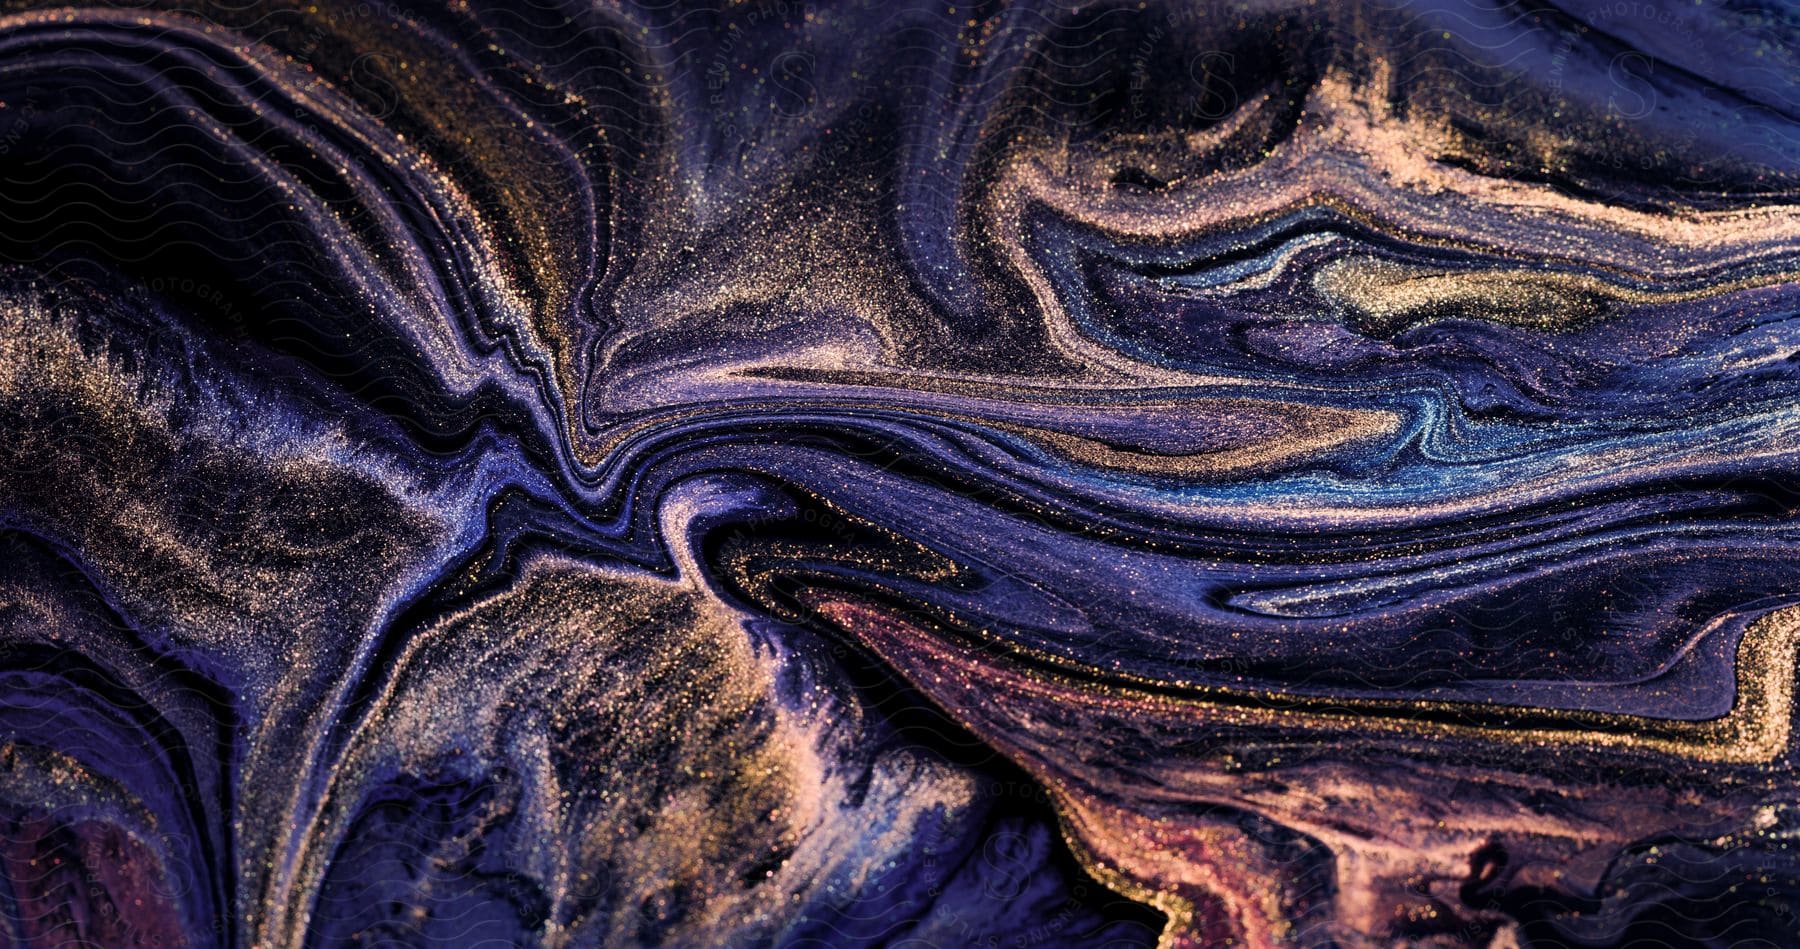 Abstract digital art of a swirling vortex of blue and purple liquid with gold dust glitter on a black background.